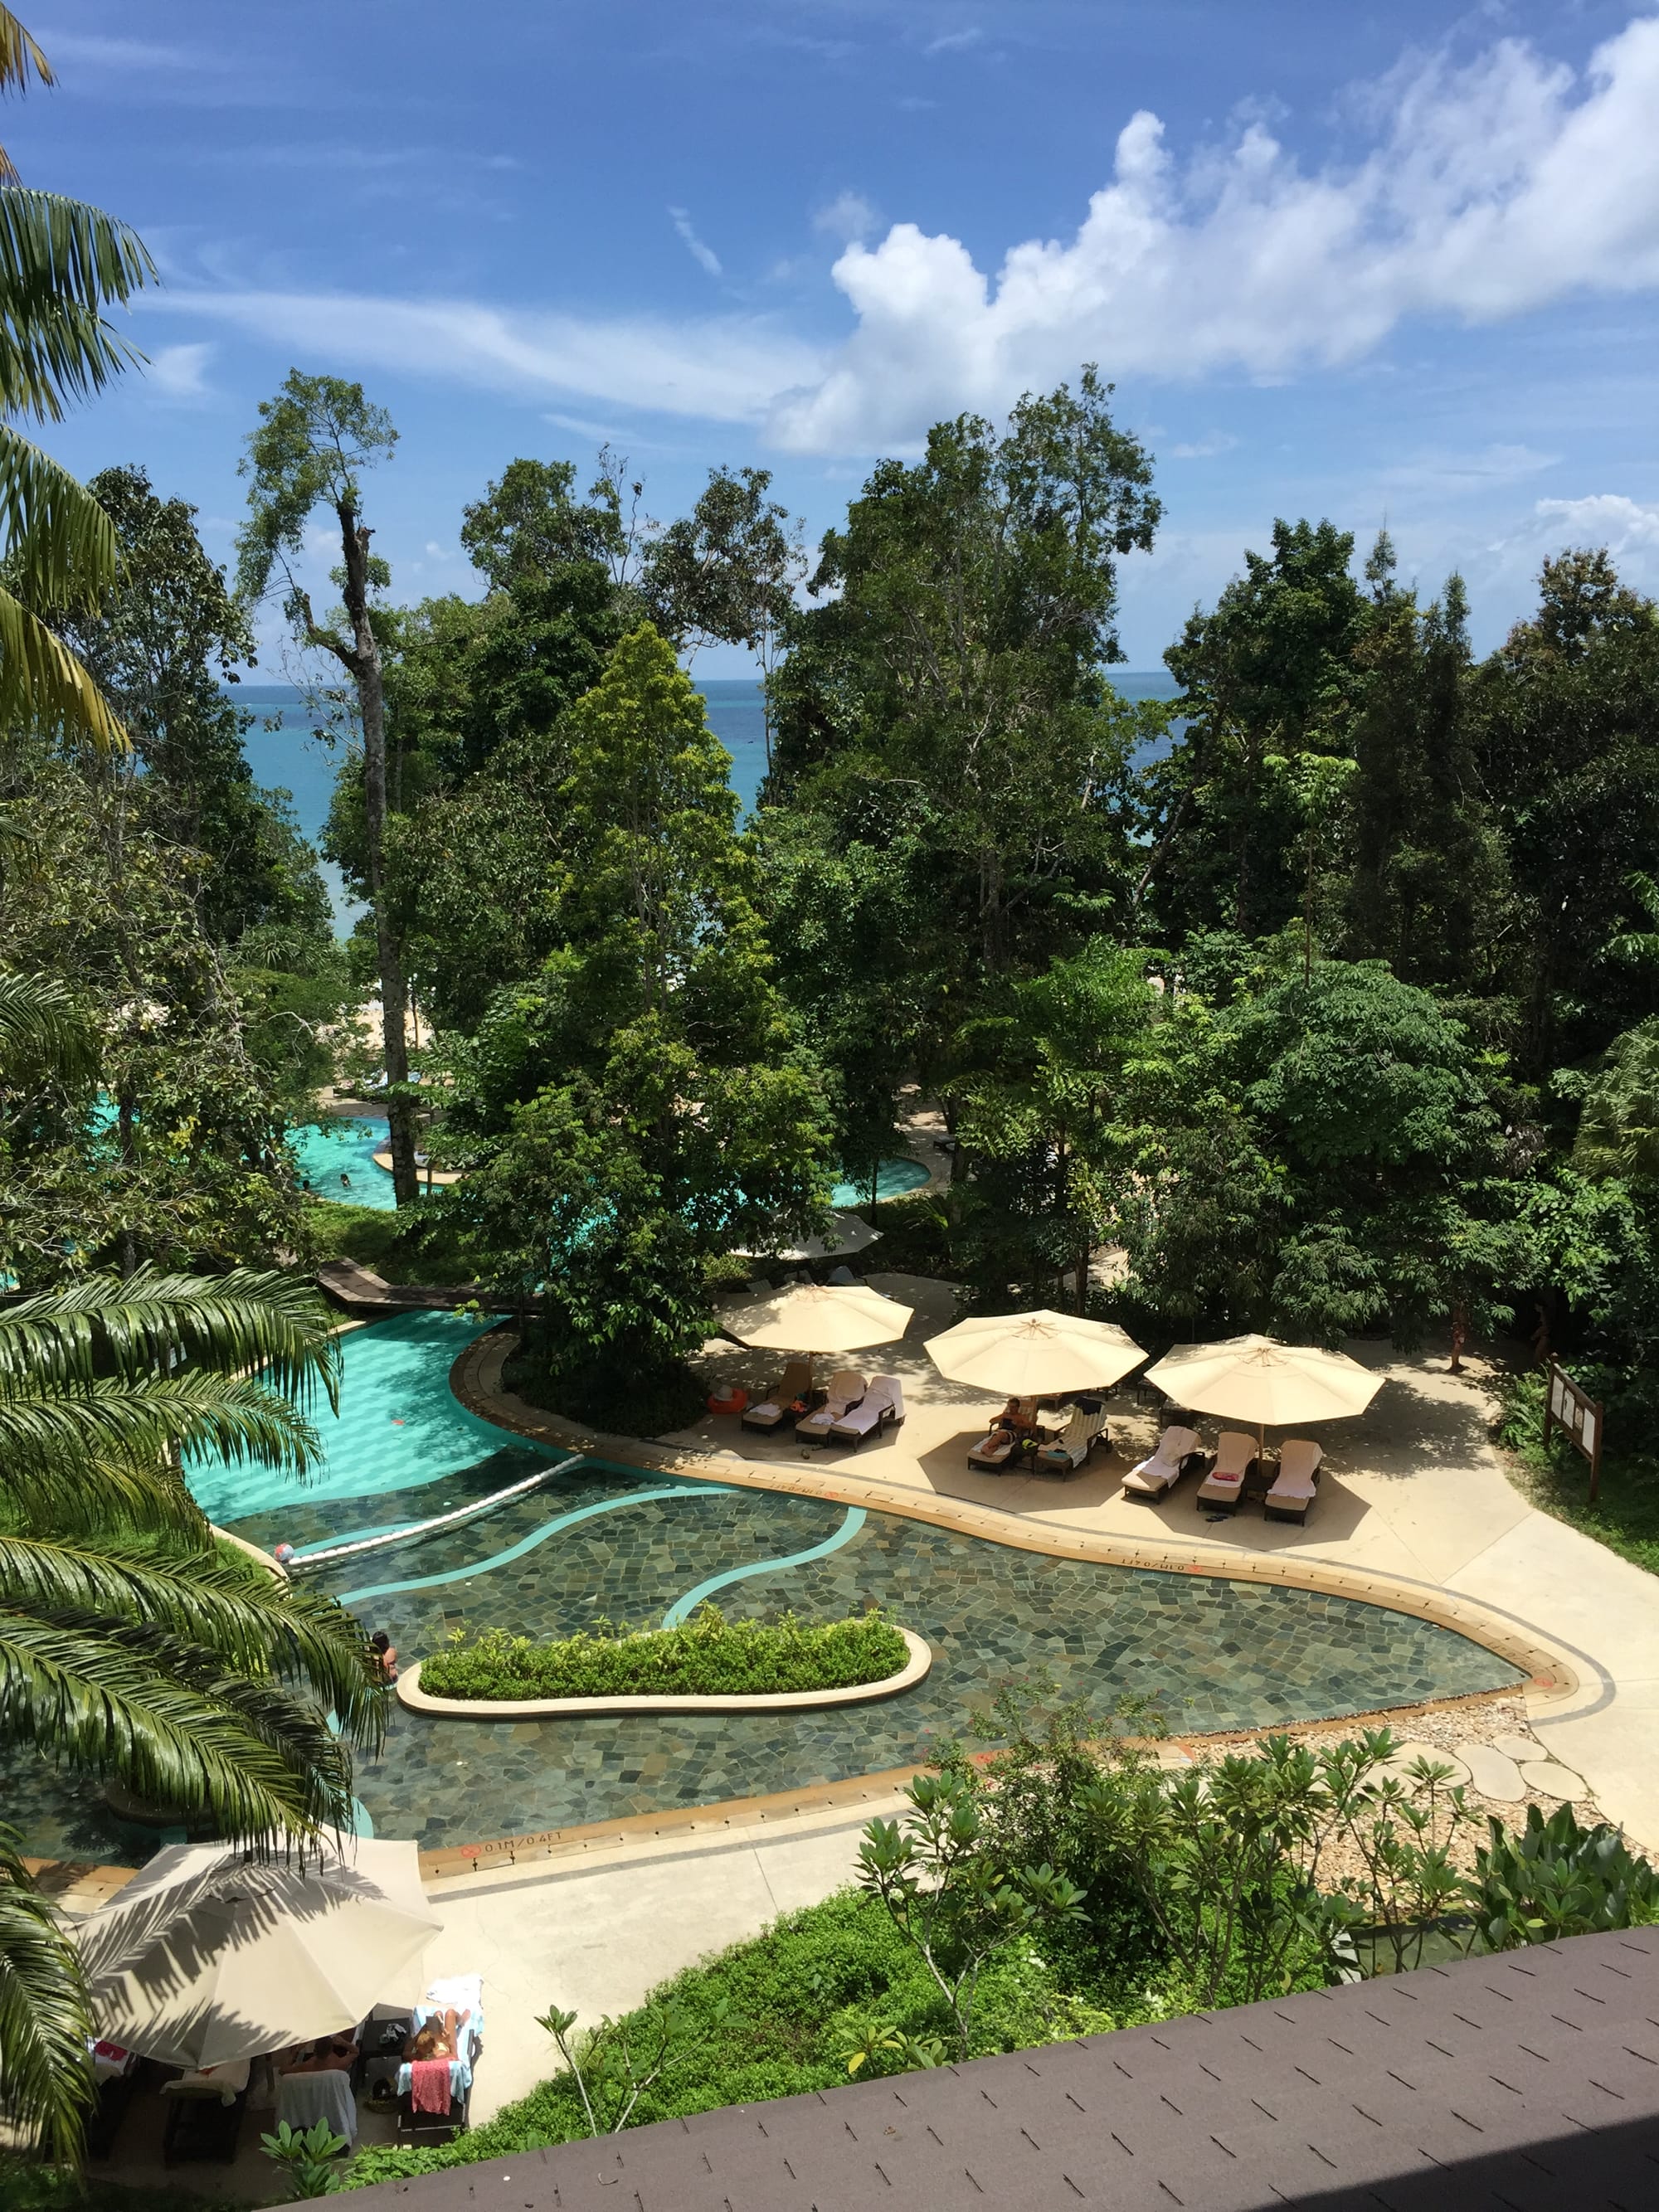 Photo by Author — The Andaman Hotel, Langkawi, Malaysia